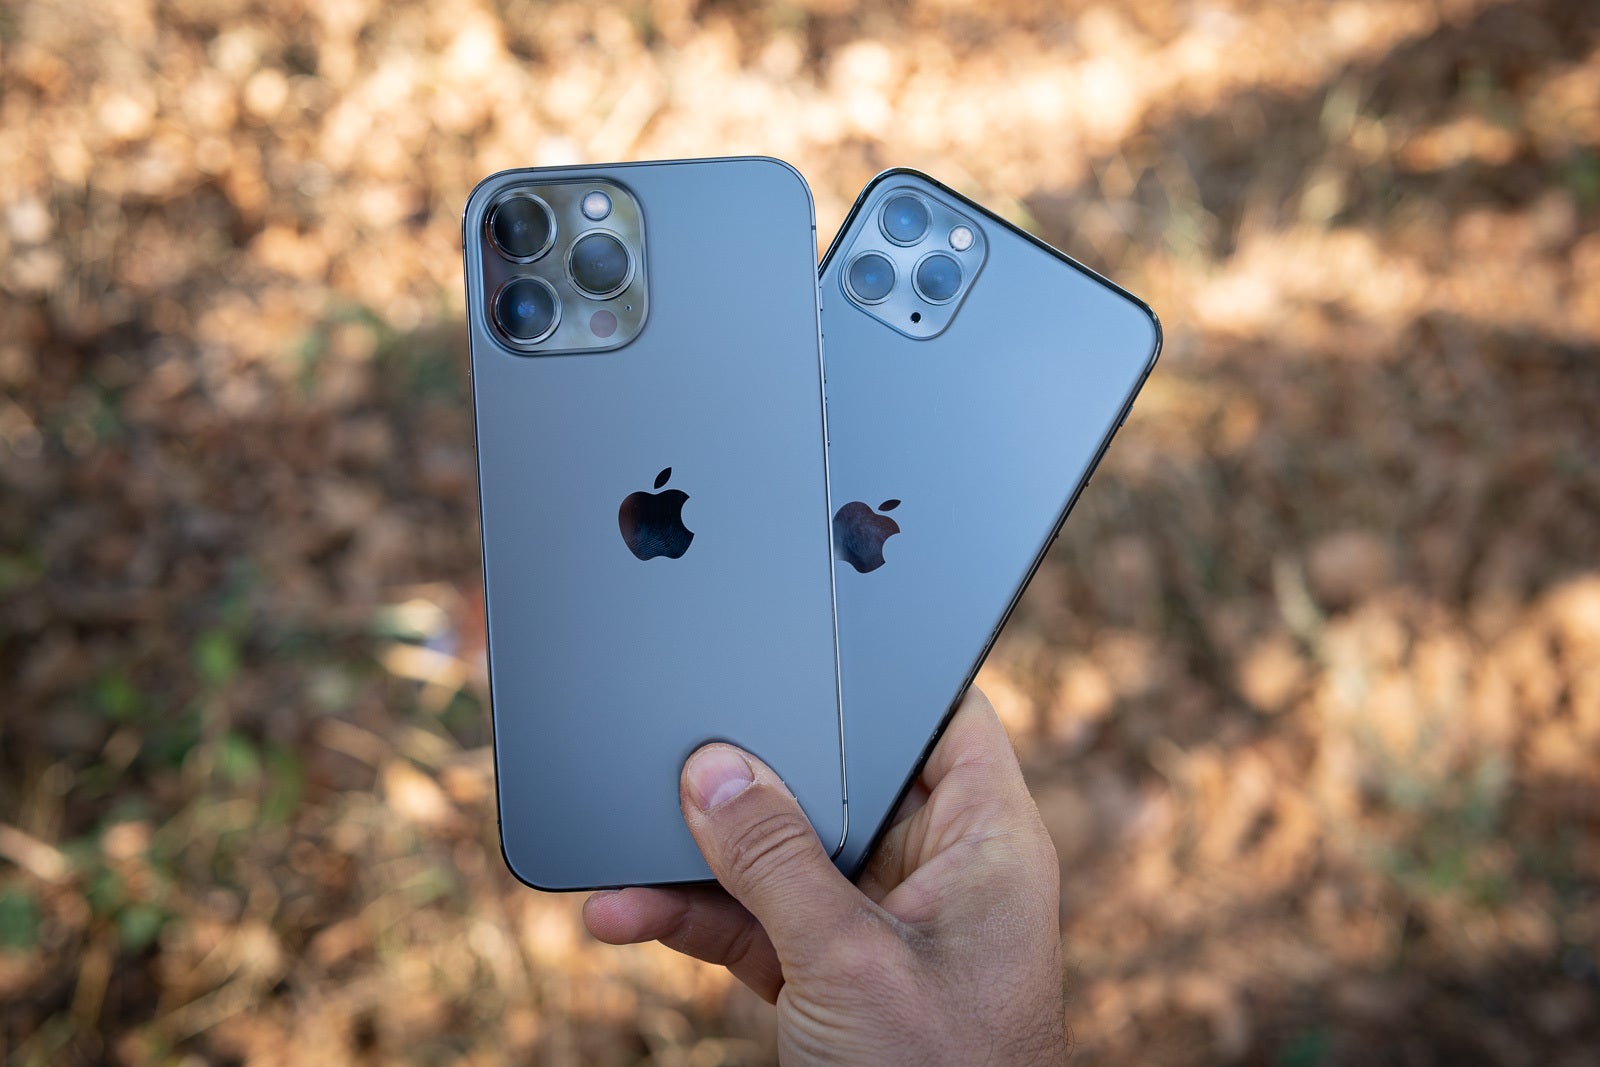 The iPhone 13 and 13 Pro Max were the best-selling phones in the world in the first quarter